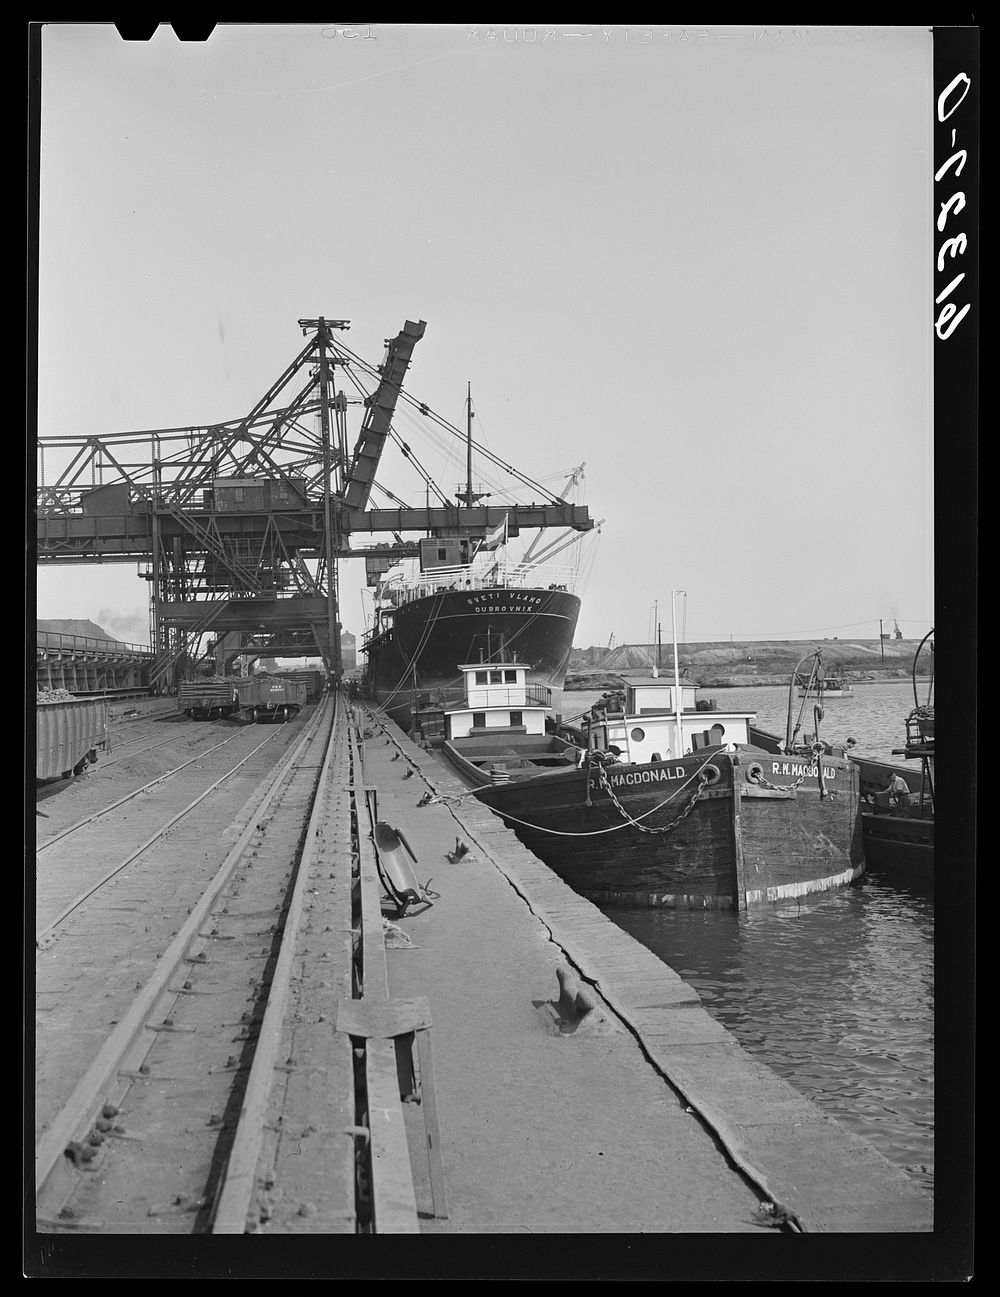 Unloading iron ore at Bethlehem steel mill. Sparrows Point, Maryland. Sourced from the Library of Congress.